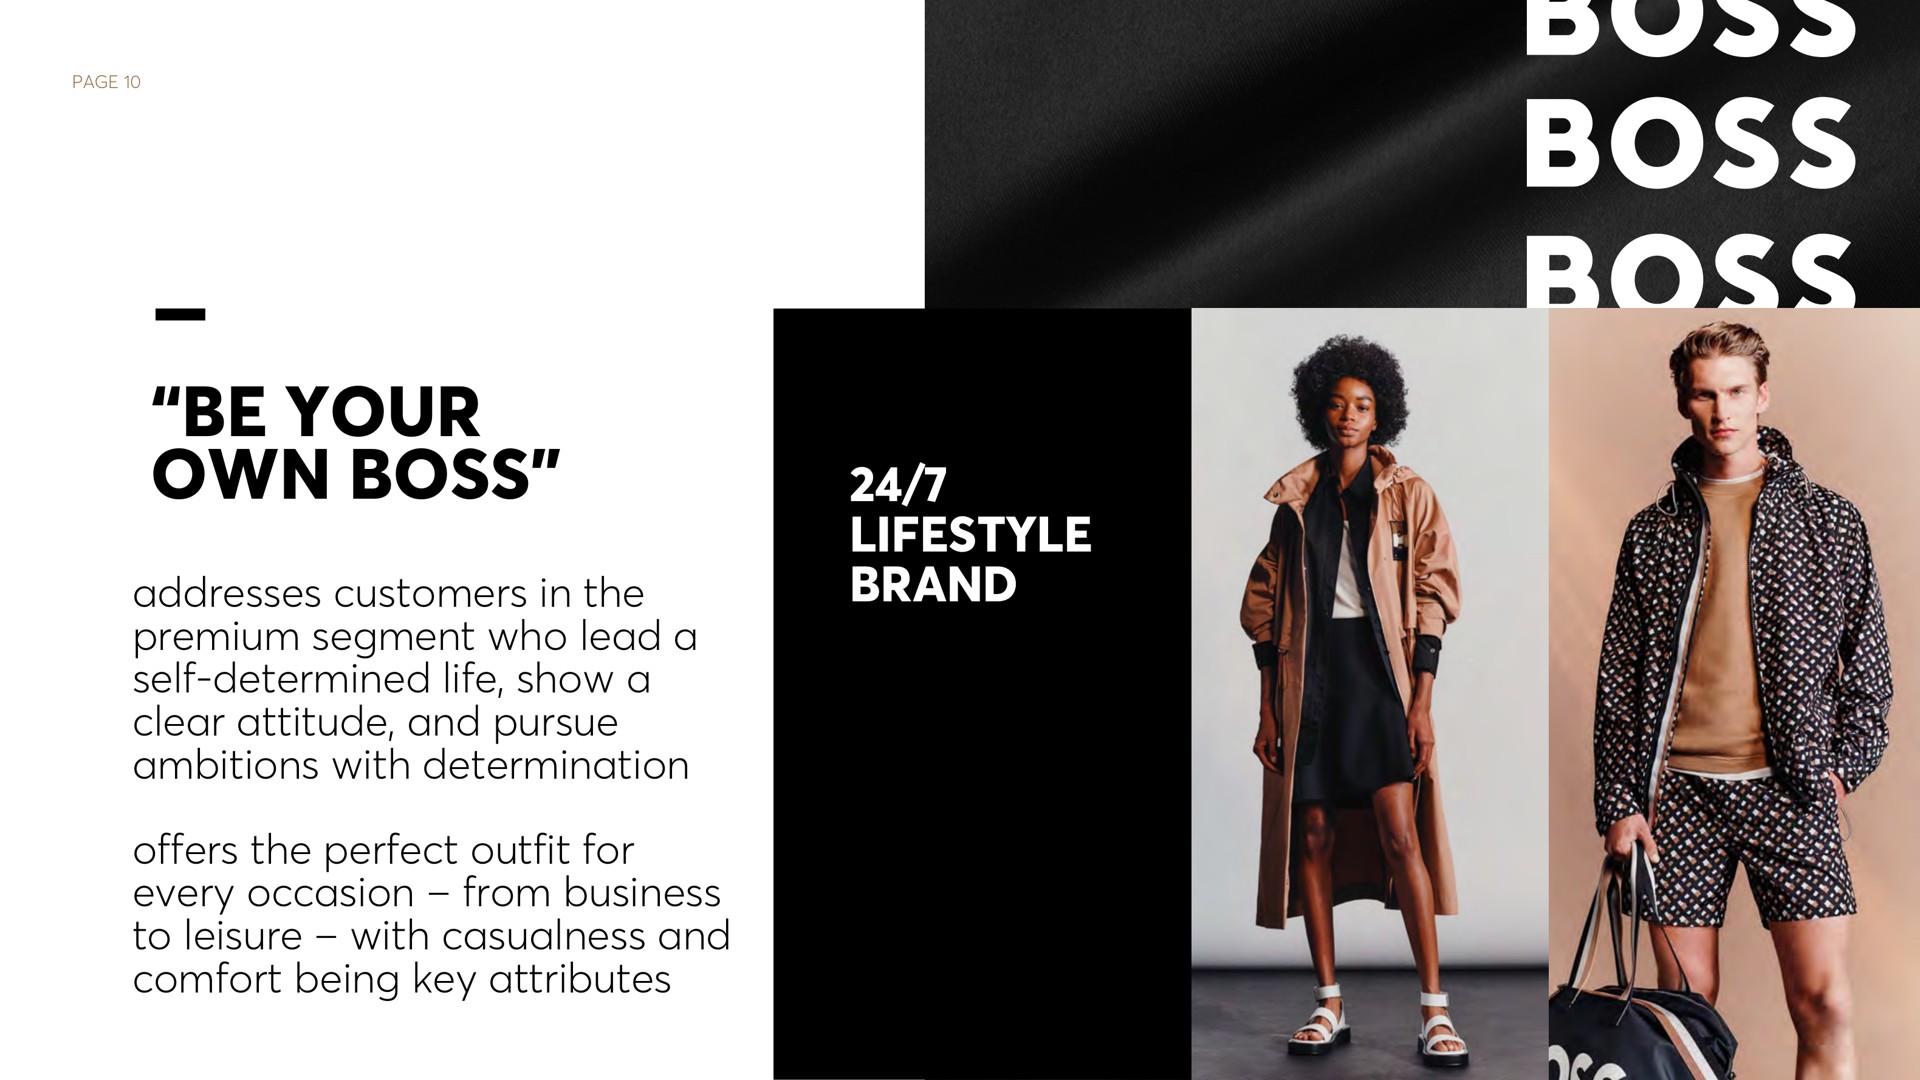 page i brand be your own boss addresses customers in the premium segment who lead a self determined life show a clear attitude and pursue ambitions with determination offers the perfect outfit for every occasion from business to leisure with casualness and comfort being key attributes | Hugo Boss